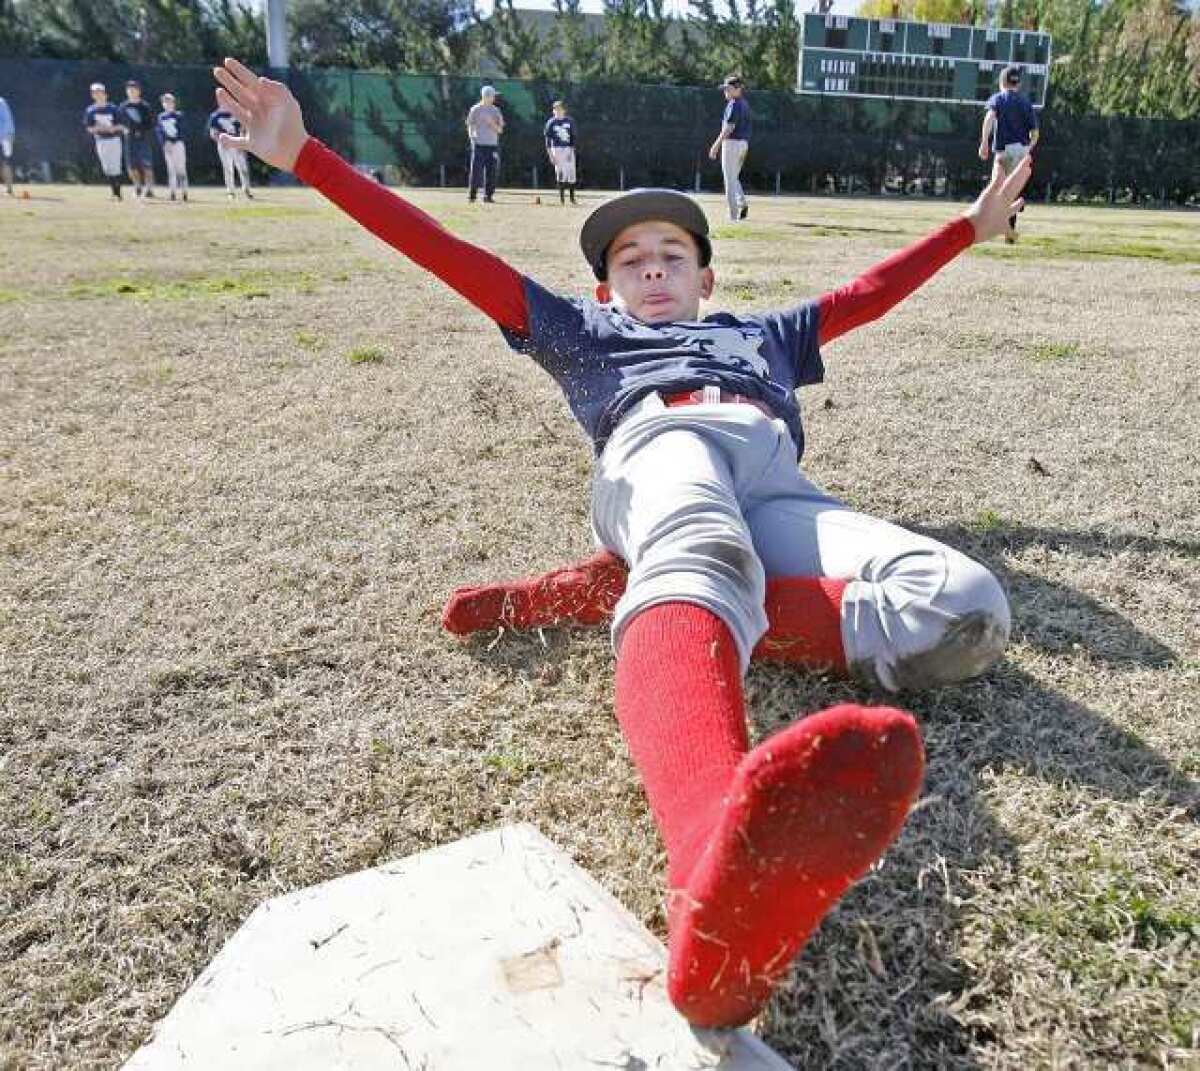 Alex Jilizian, 13, of Glendale, successfully slides into a base during a drill at the Annual Falcon Baseball Camp at Stengel Field in Glendale.